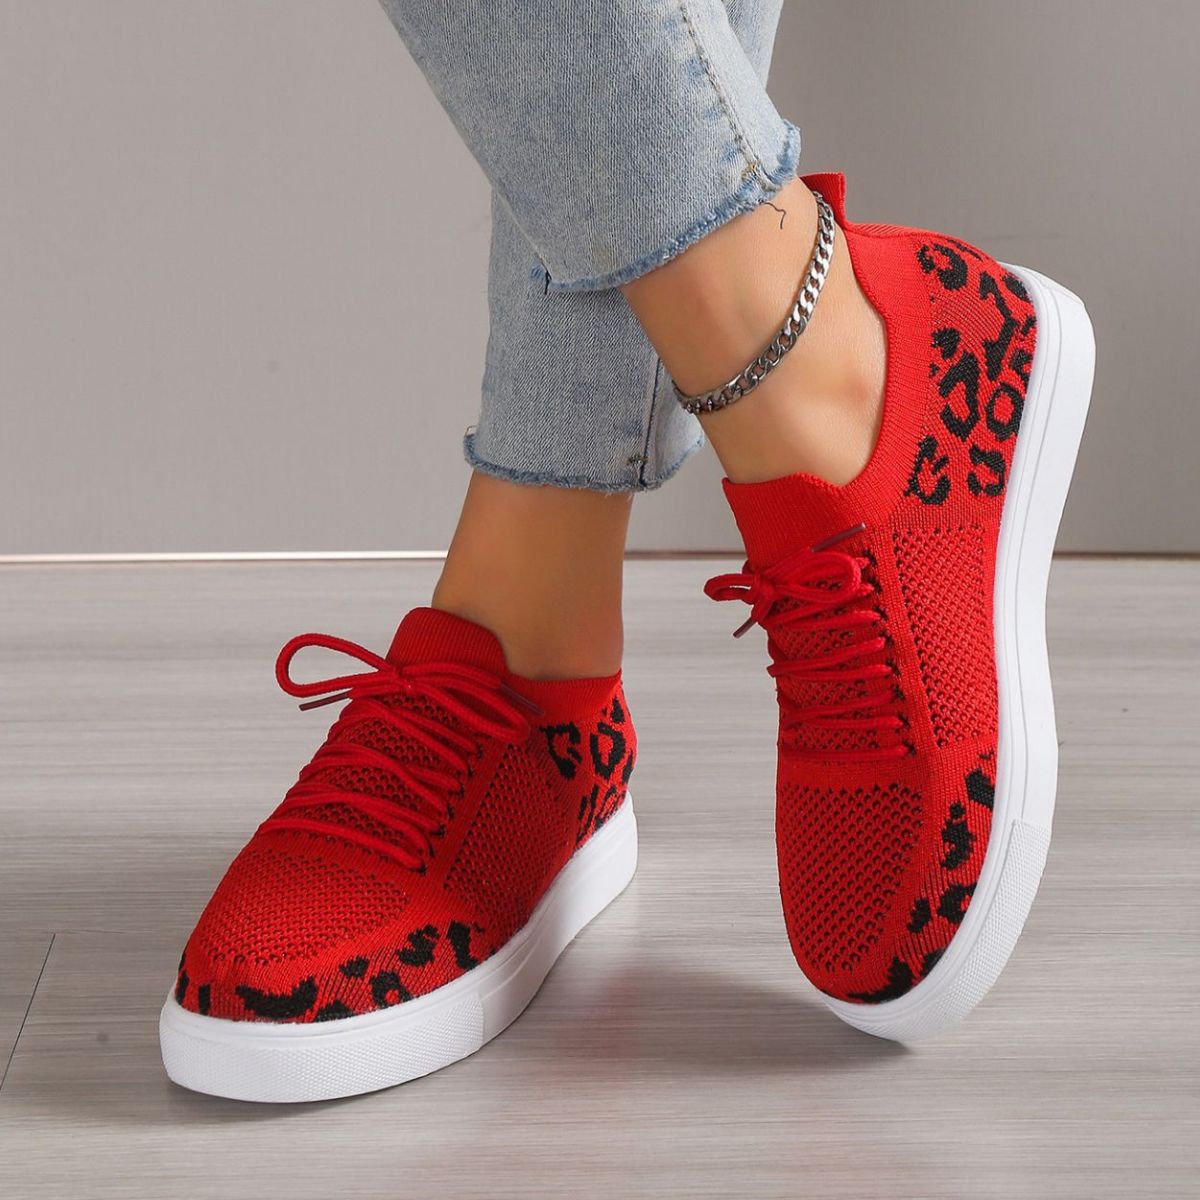 Lace - Up Leopard Flat Sneakers - OMG! Rose